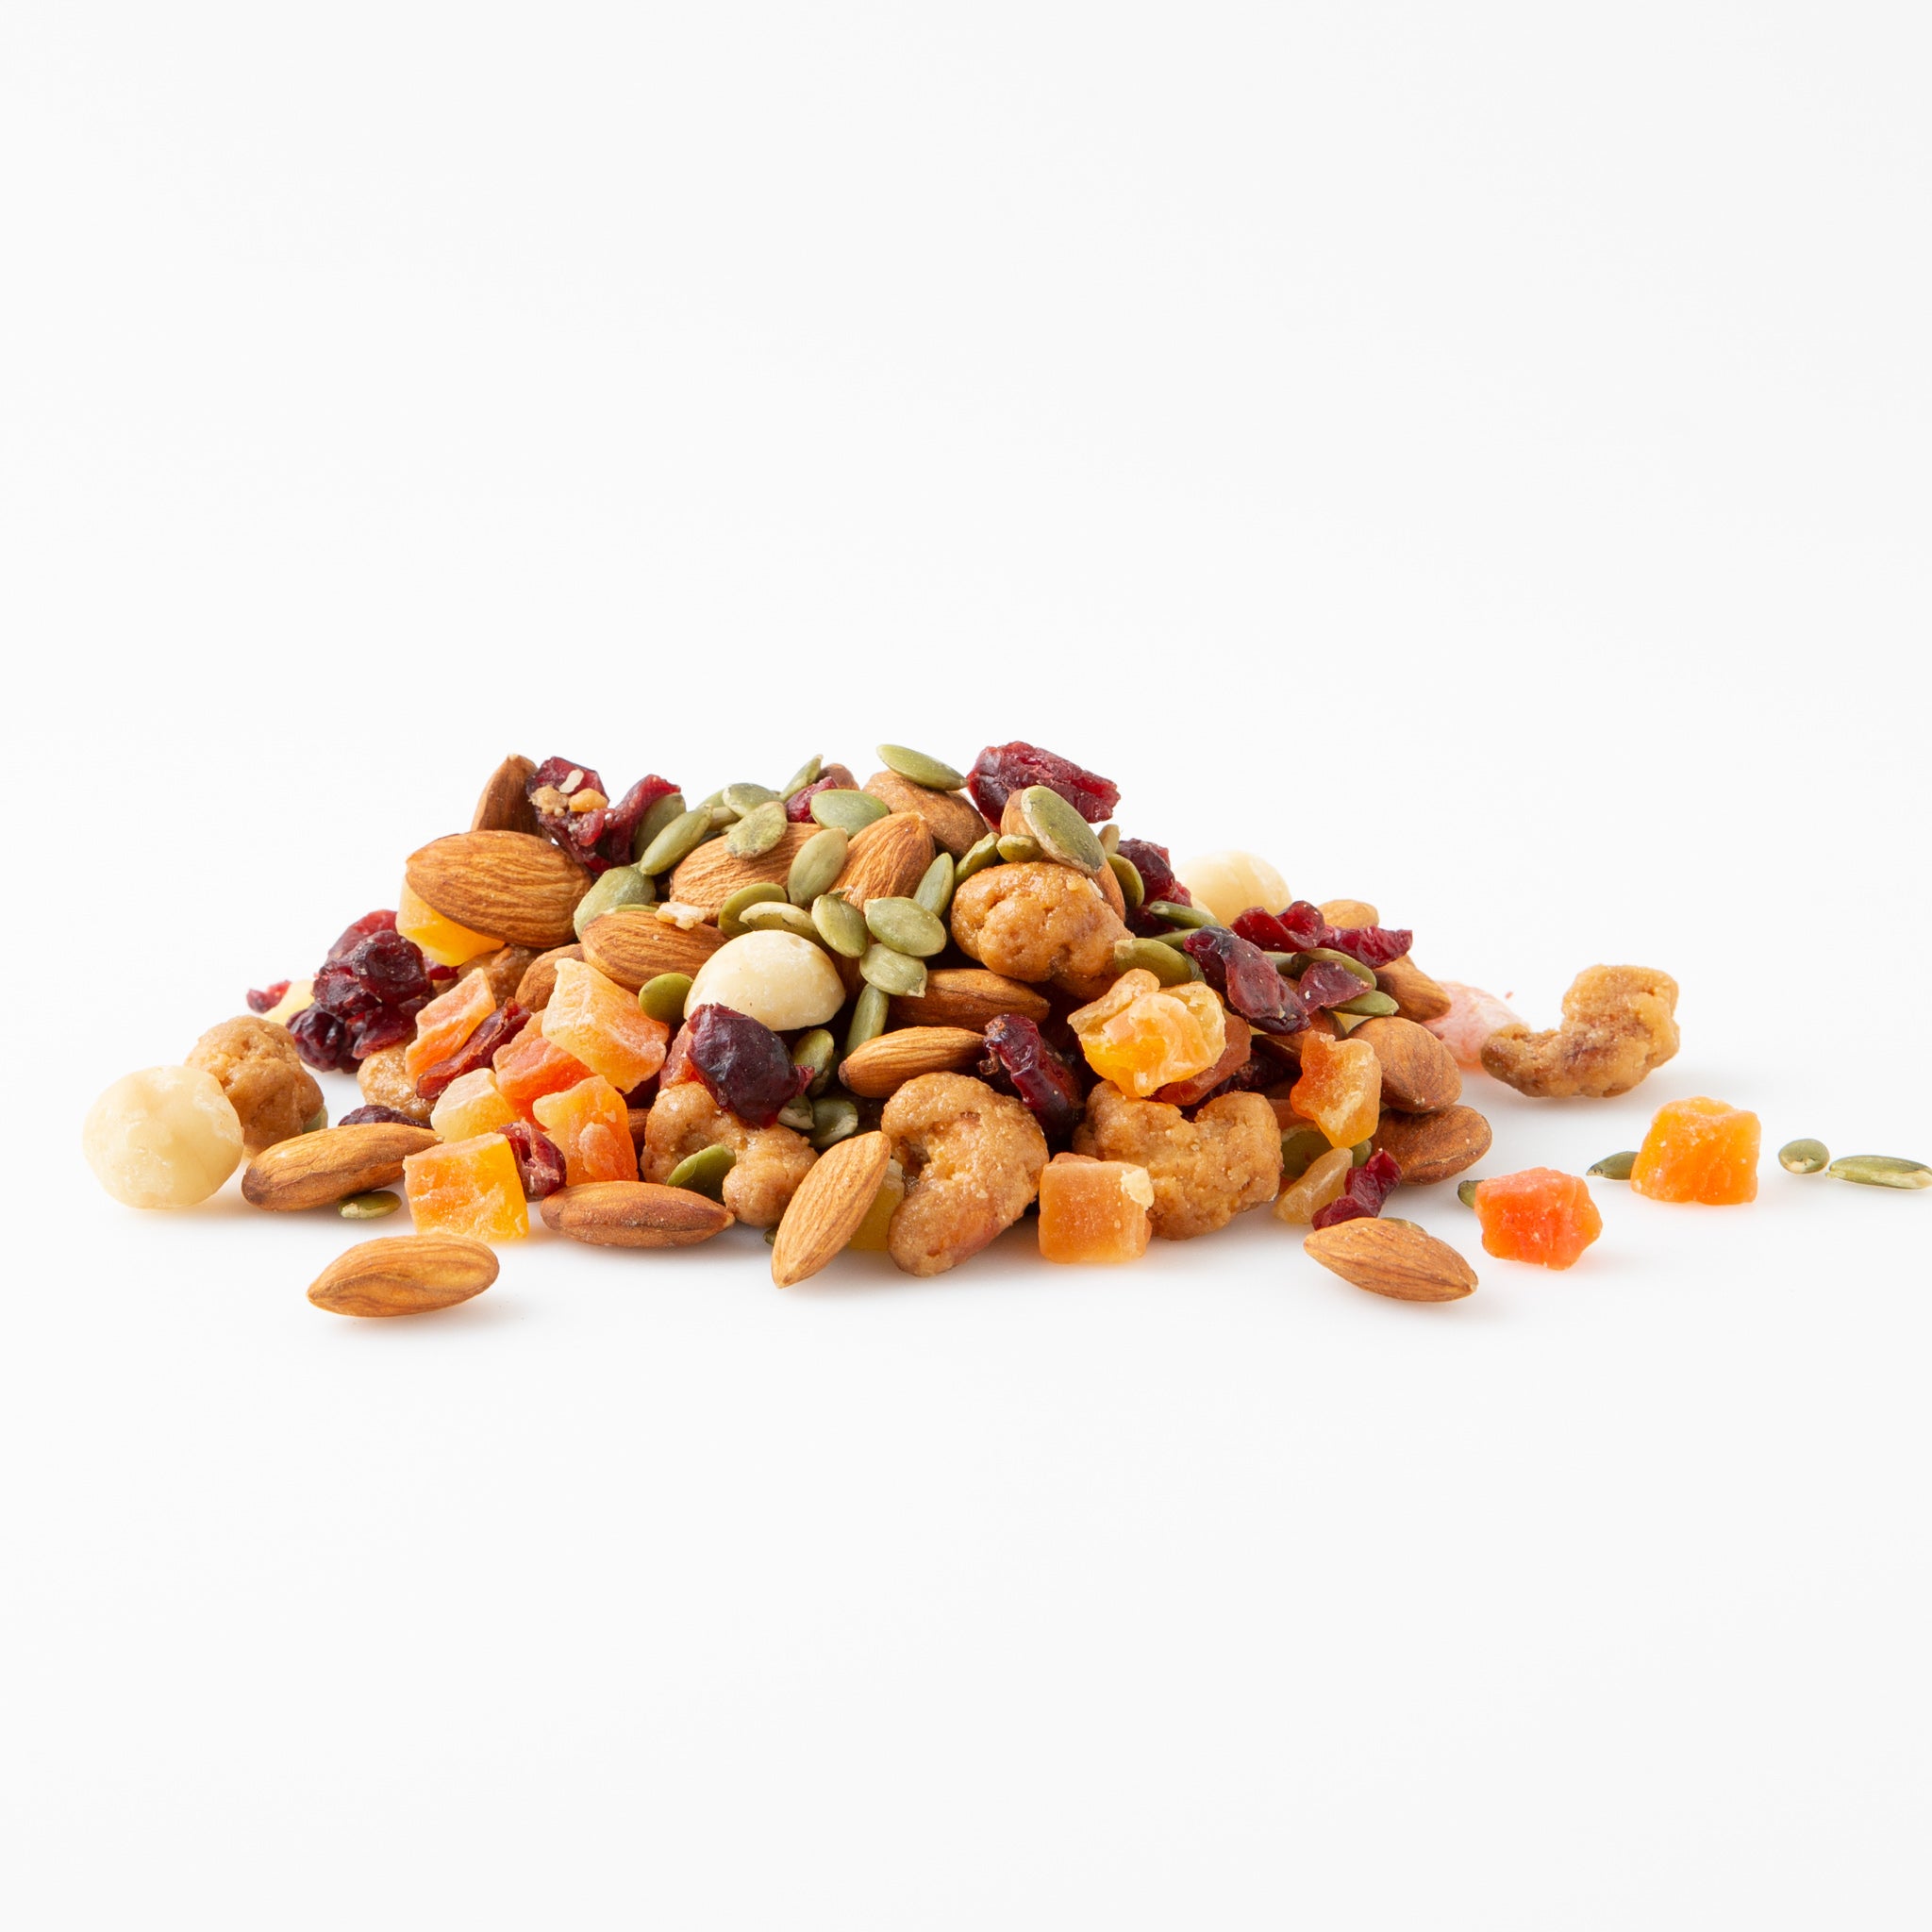 Healthy Indulgence Mixed Nuts (Raw Nuts) Image 2 - Naked Foods